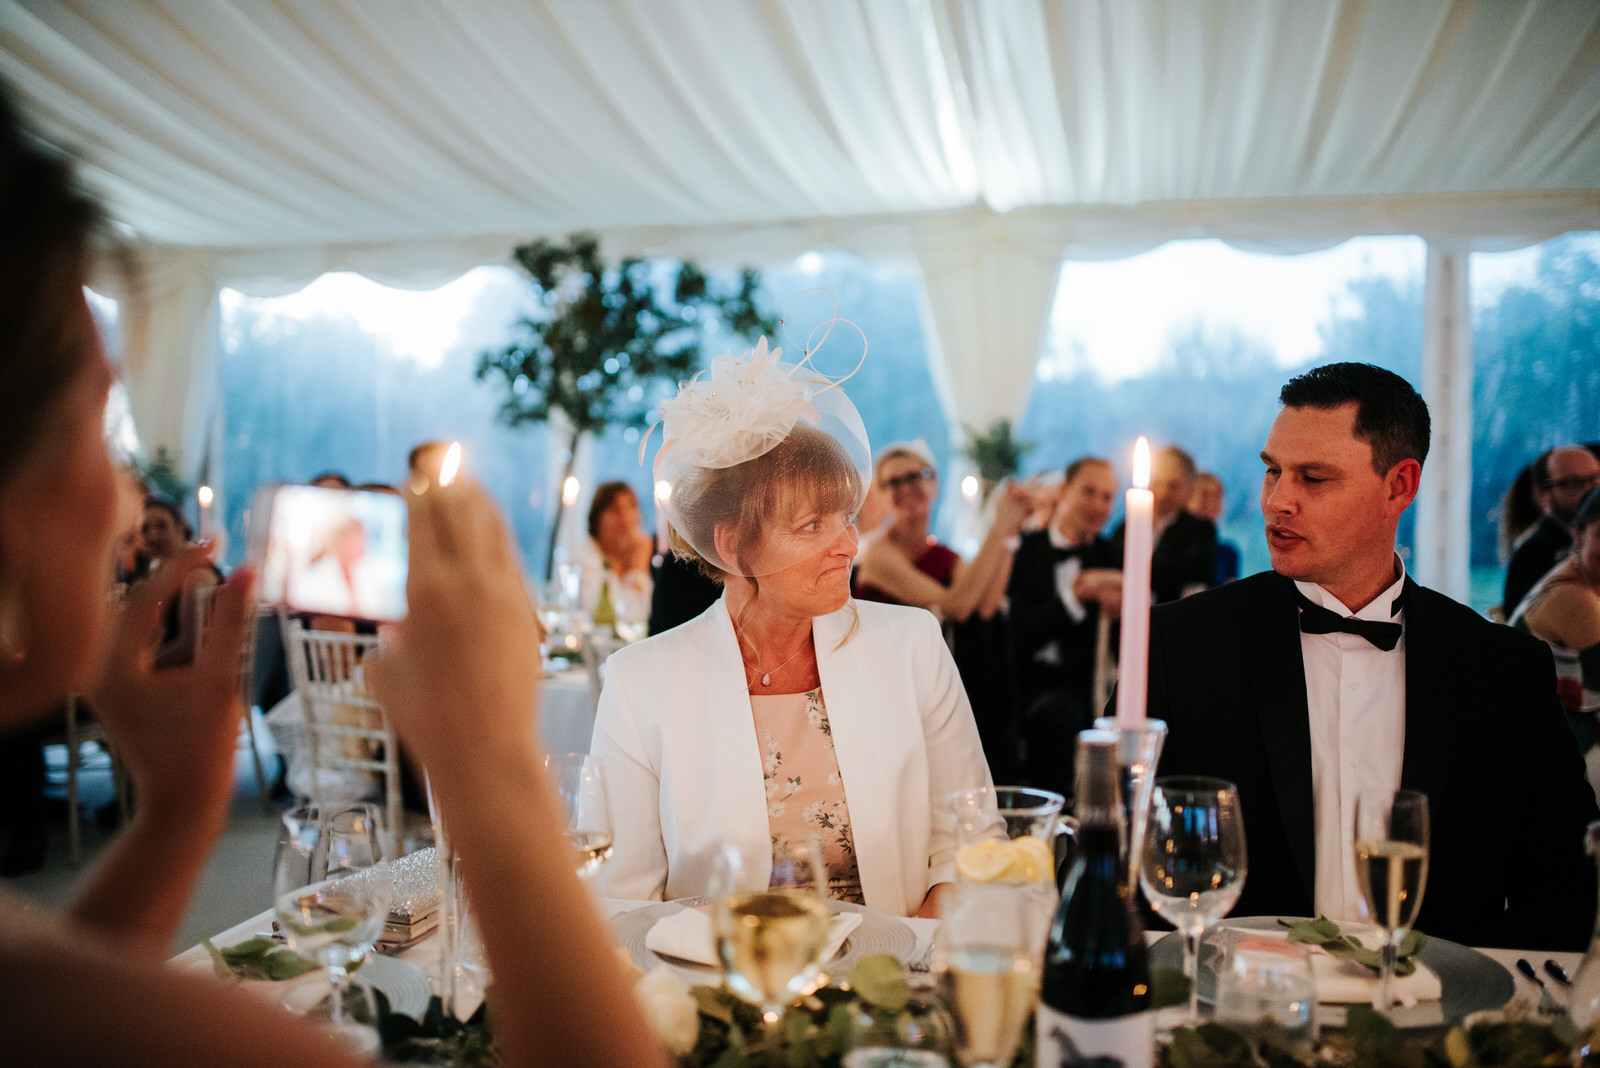 Mother of the Groom gets emotional as guests start singing Happy